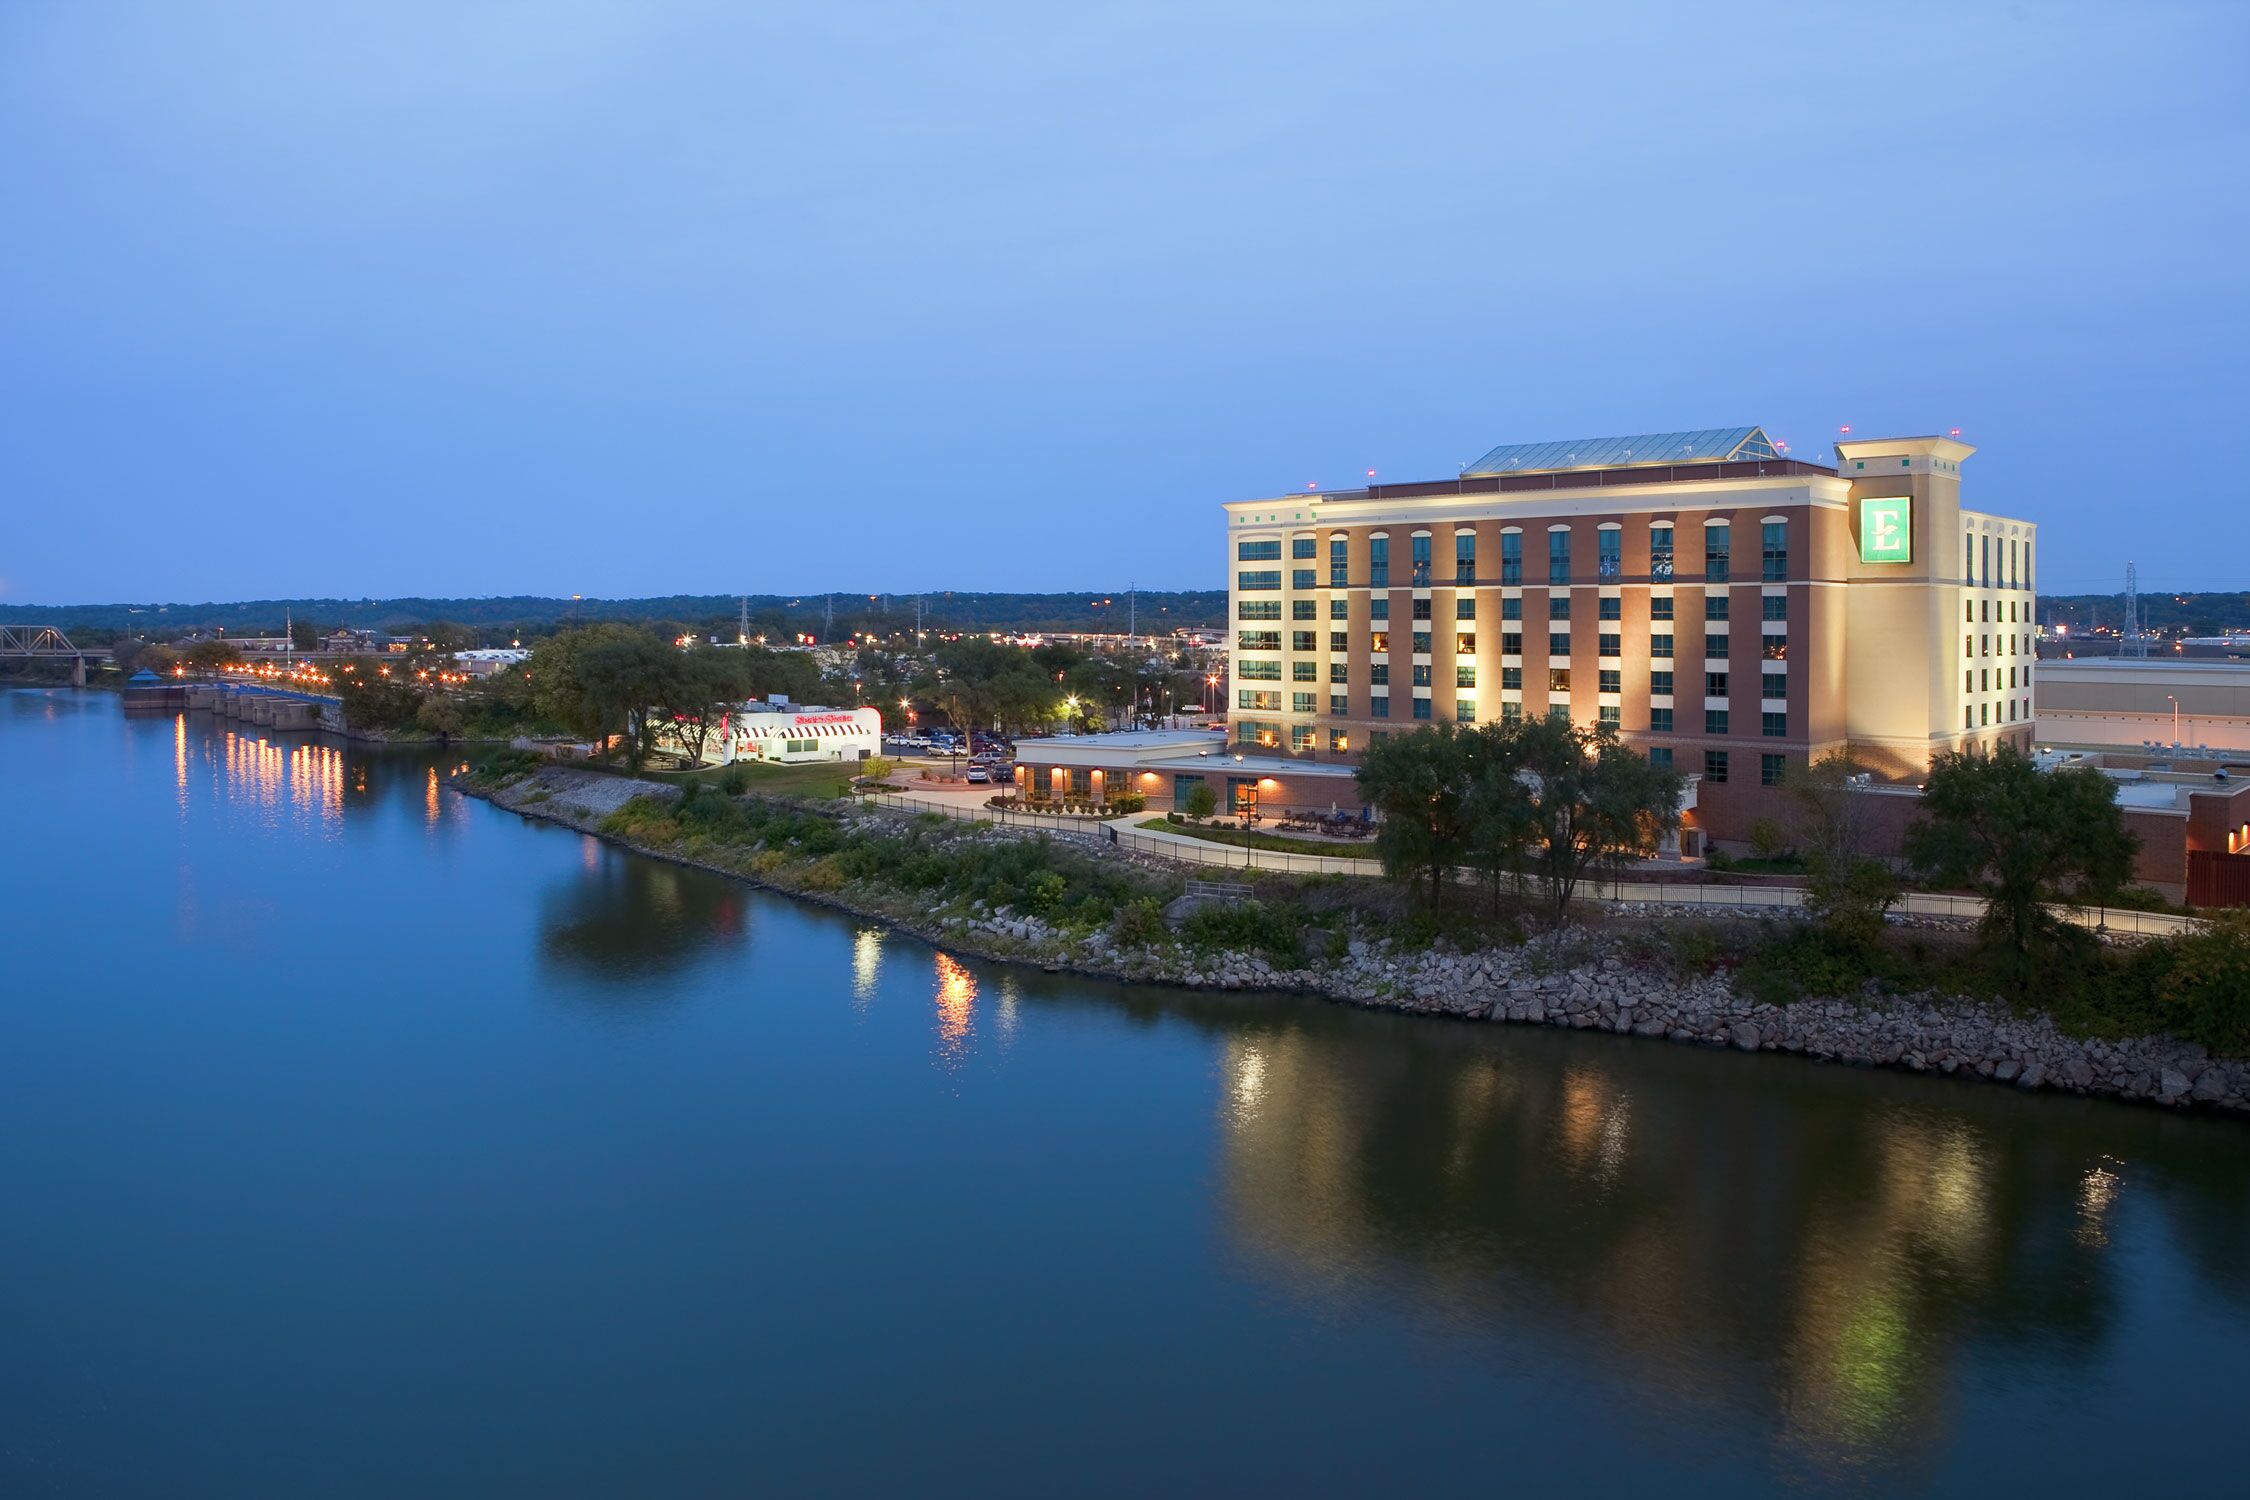 Embassy Suites East Peoria - Hotel Riverfront Conf Ce Reception Venues - The Knot